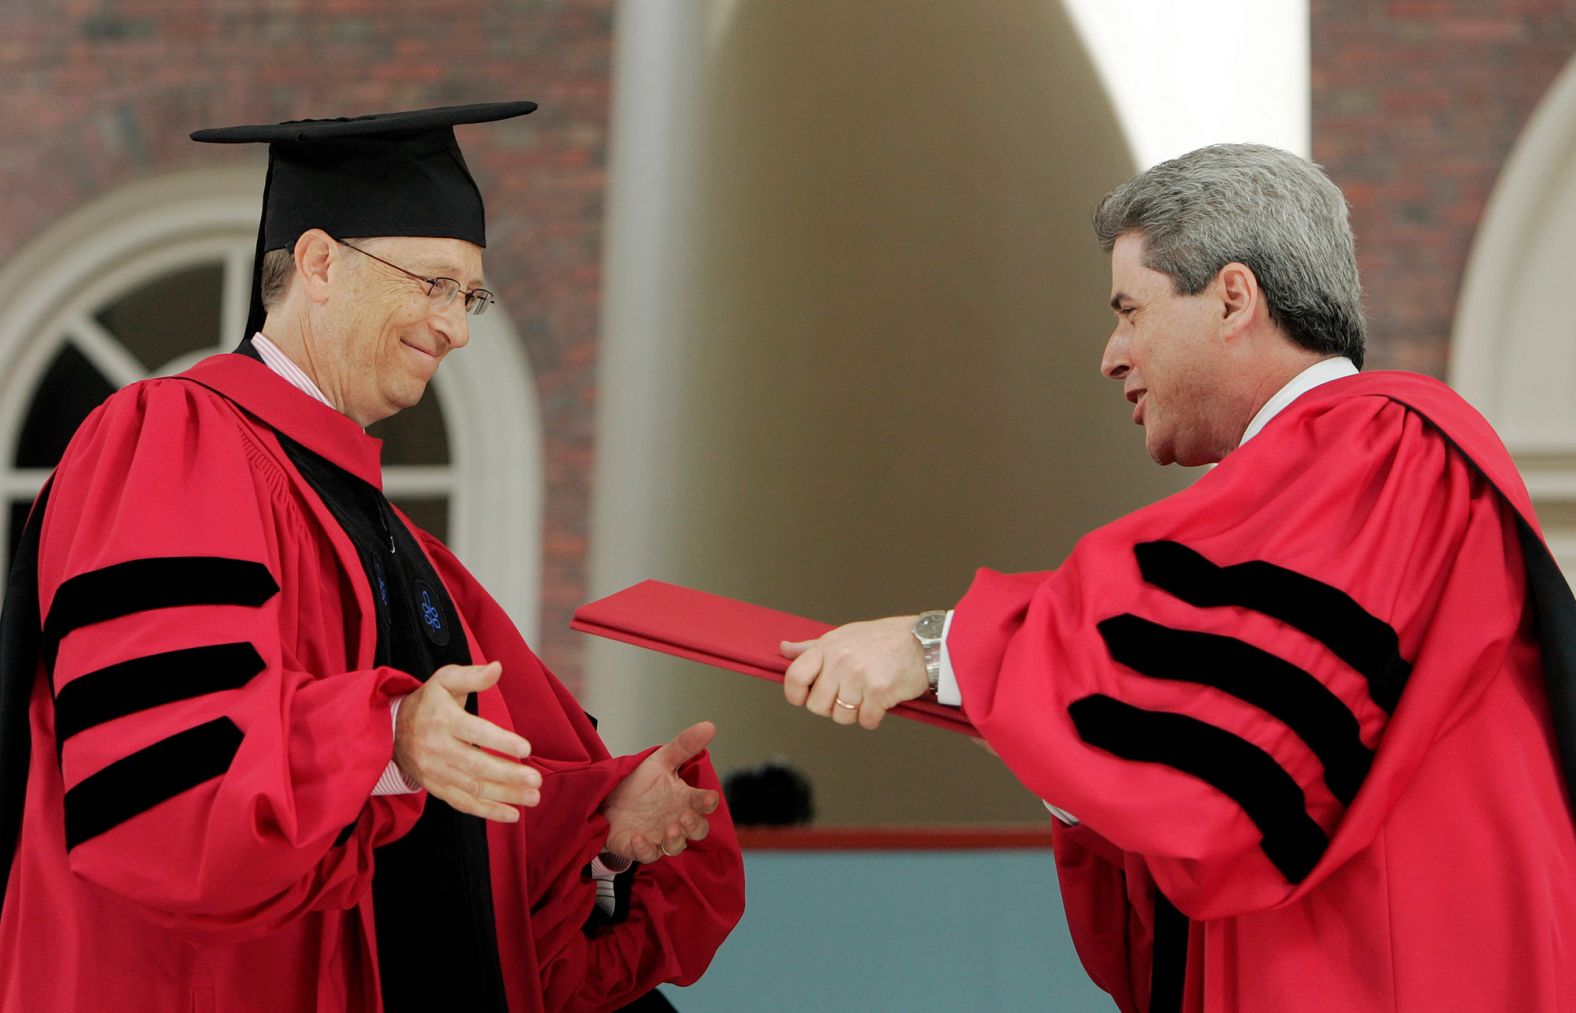 Gates receives an honorary degree at Harvard in 2007. He also delivered the commencement address at the school, which he dropped out of in 1975.